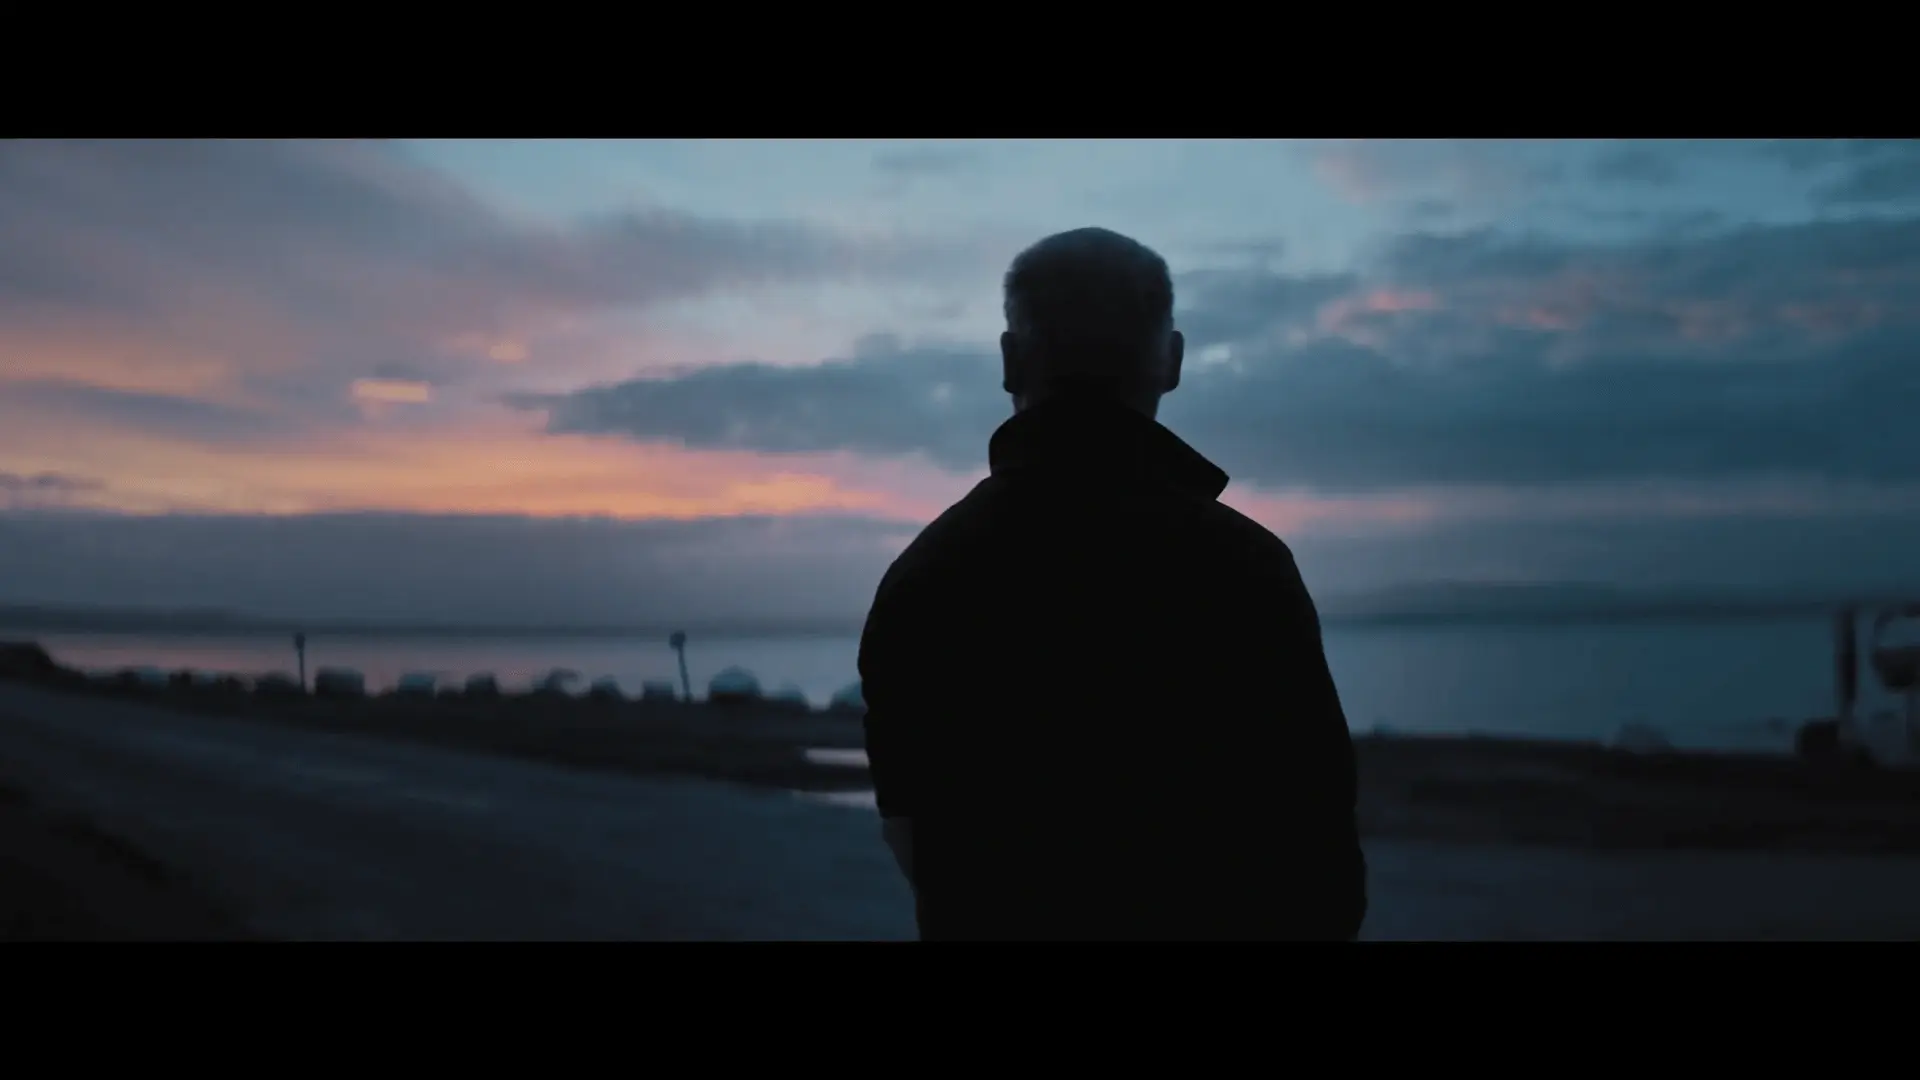 From the short film 'The Botanist' directed by Zach Joseph with cinematography by Paolo Bischi. Image features a man in front of a sunset looking out to the horizon.